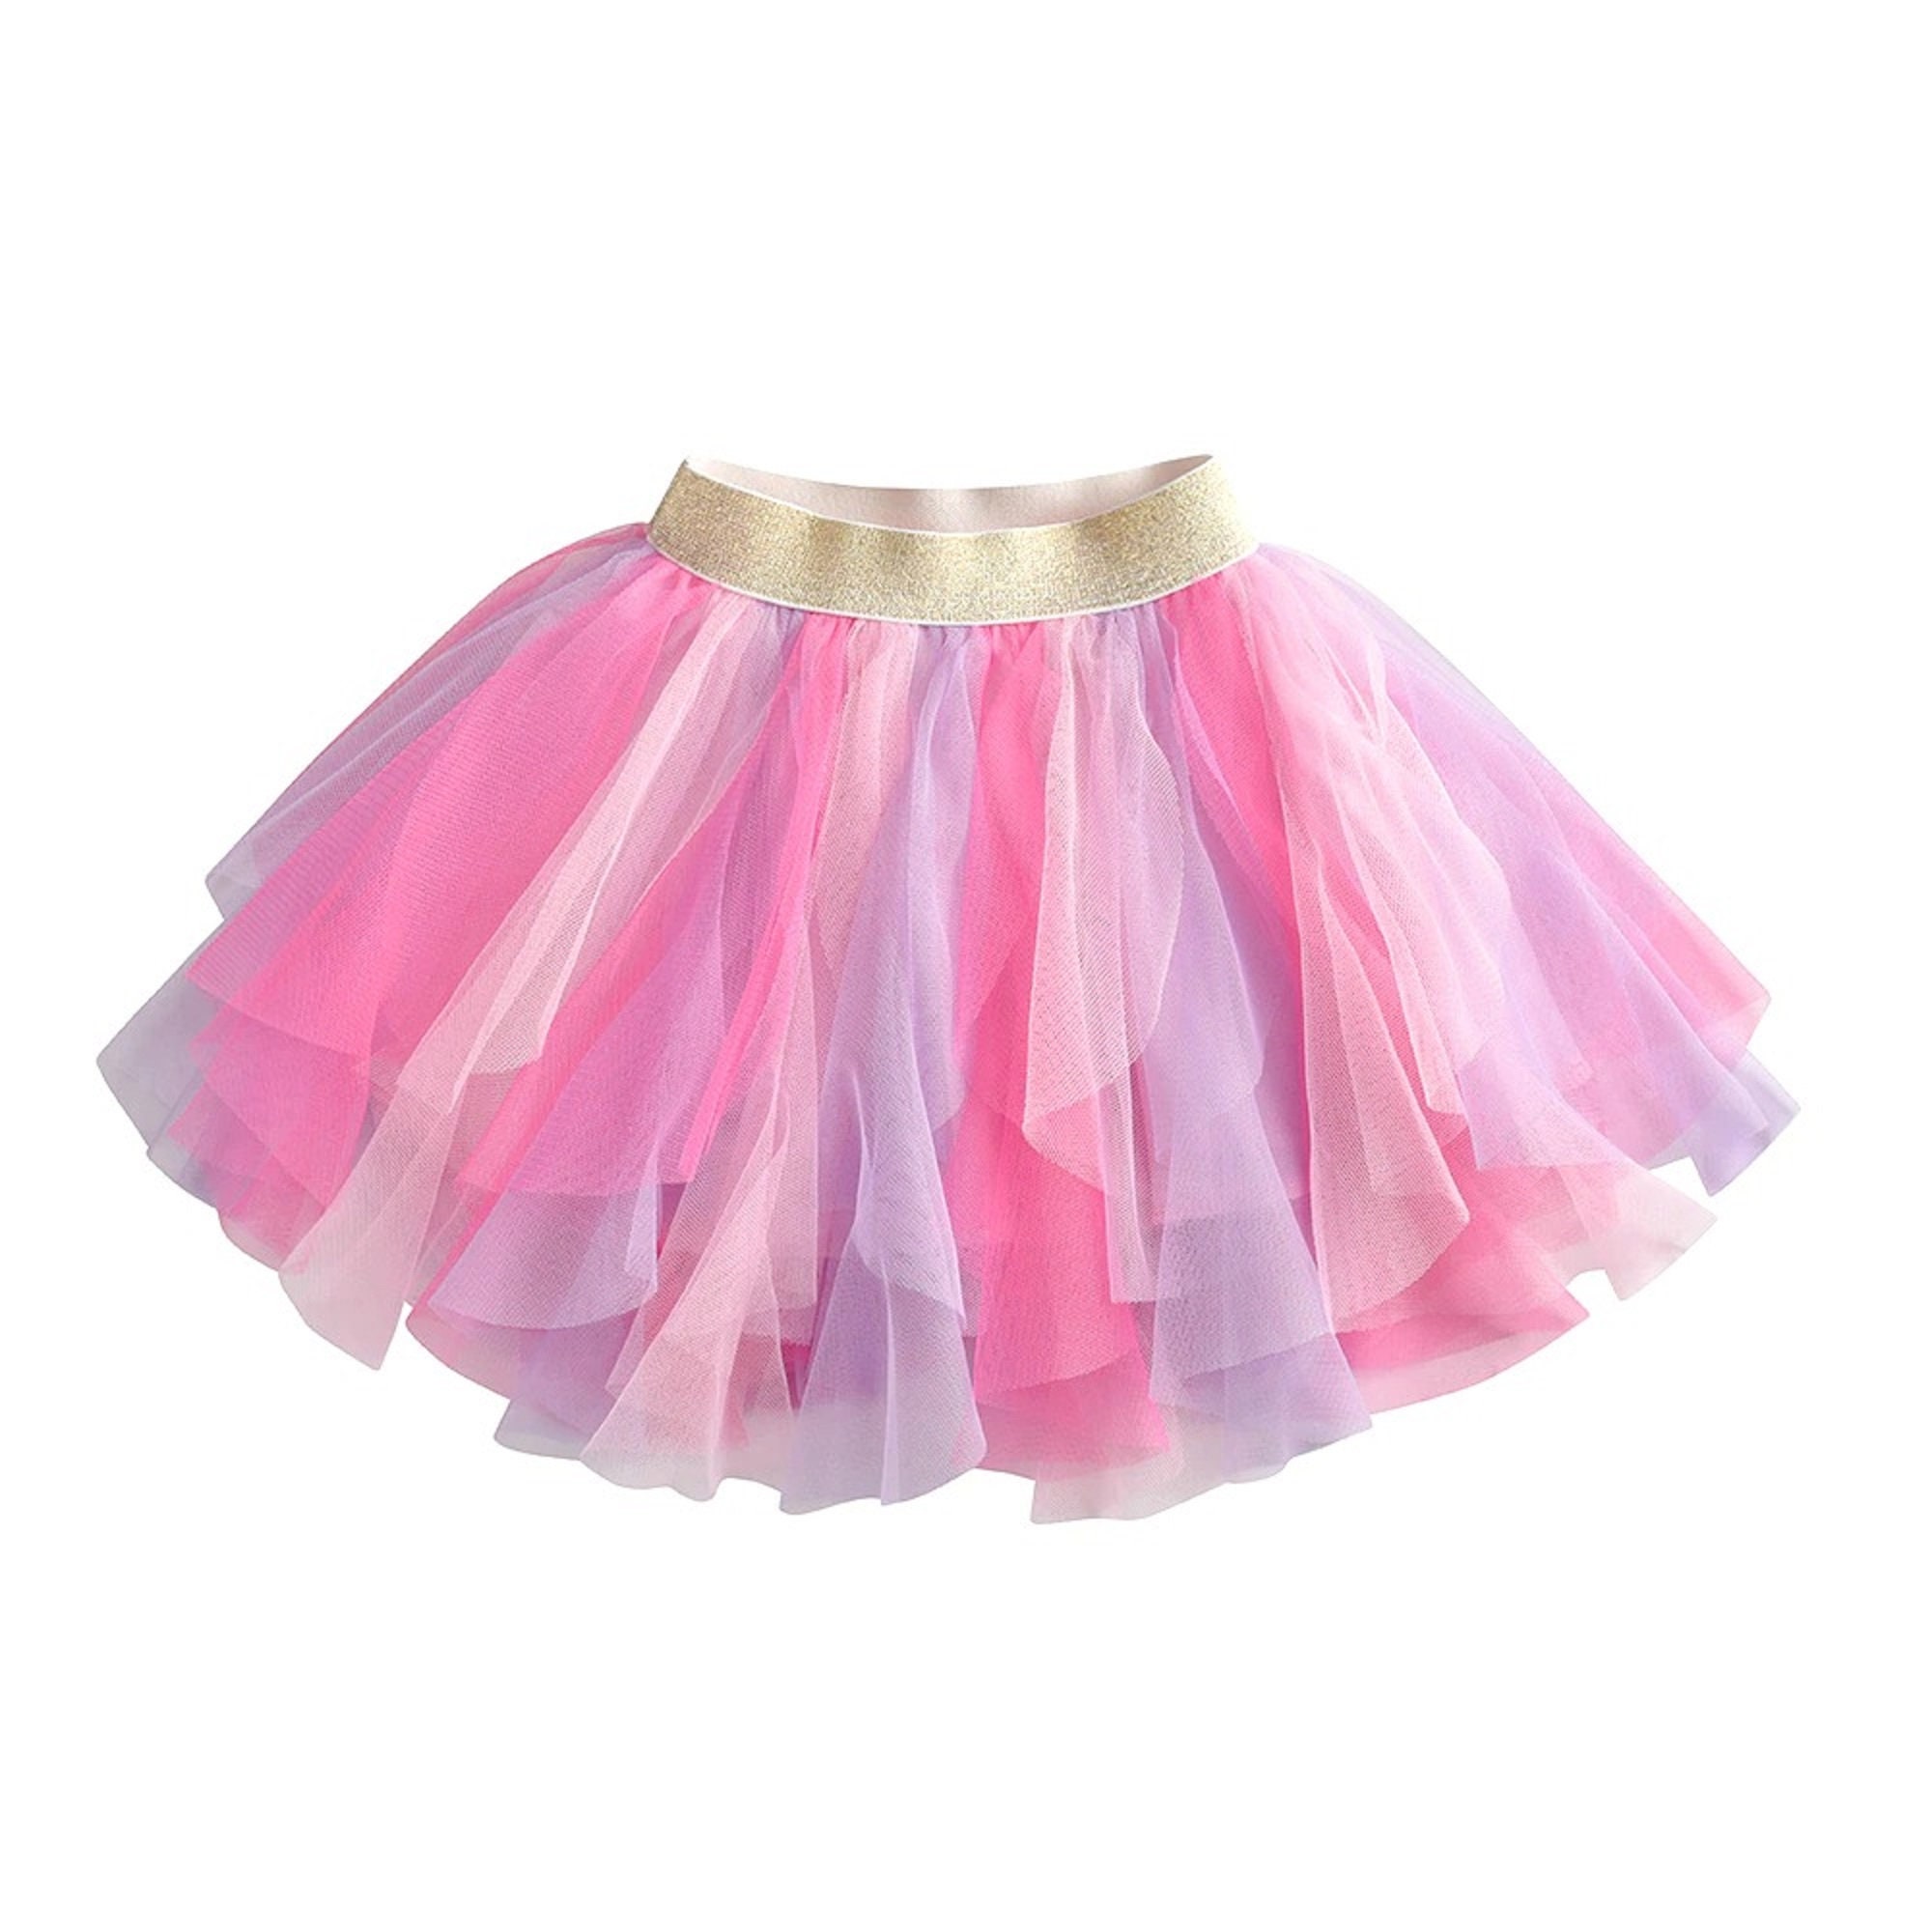 Pink Rainbow Tutu Skirt for Girl 3-8 Years Old. Super Soft & - Etsy